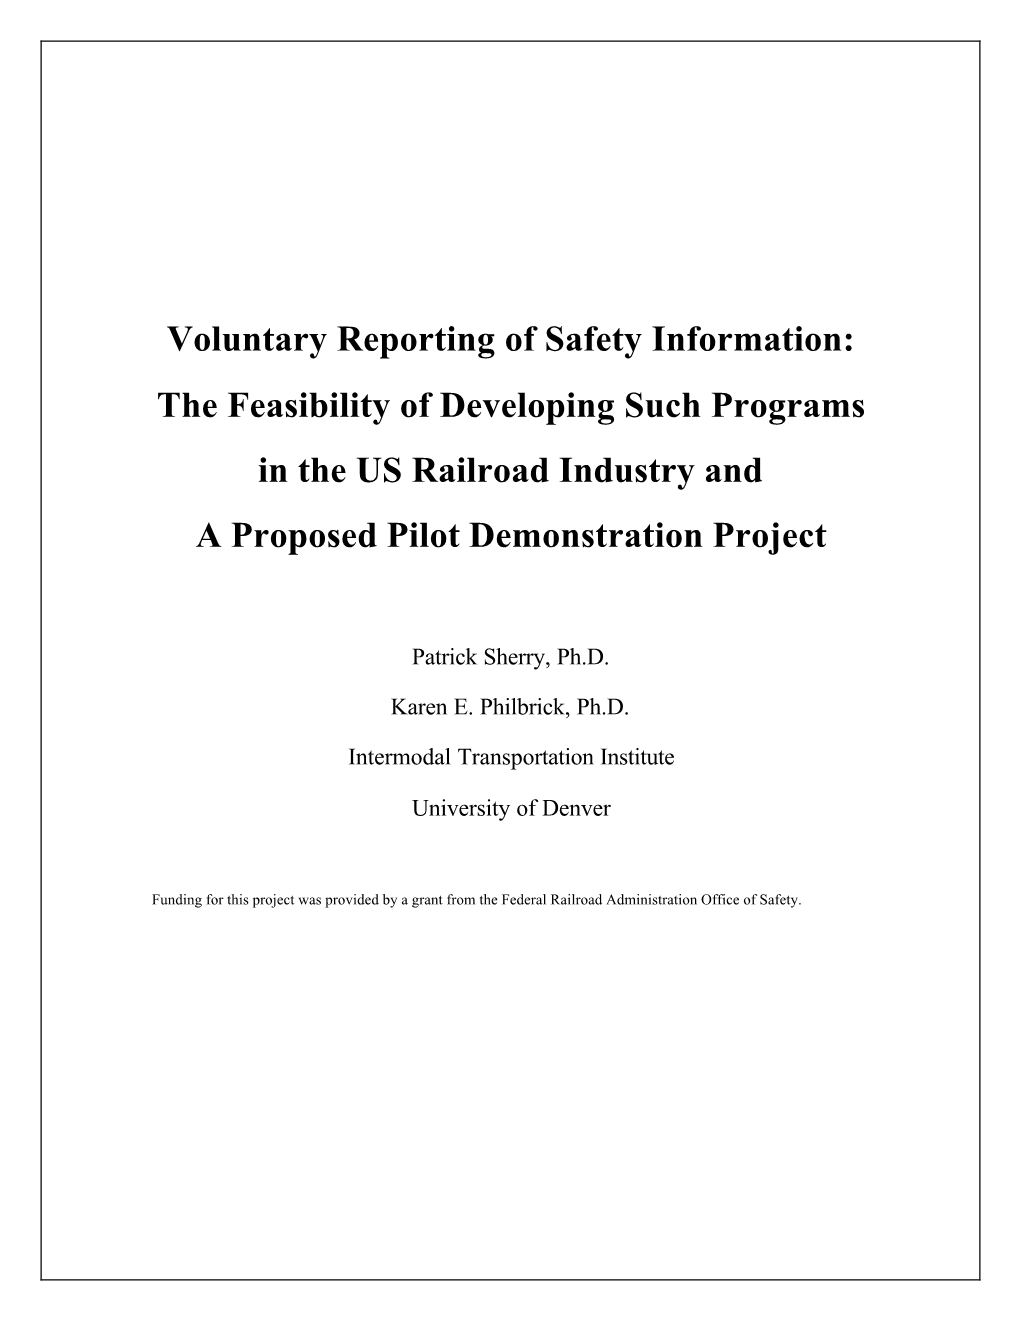 Report on Voluntary Reporting-5-30-03